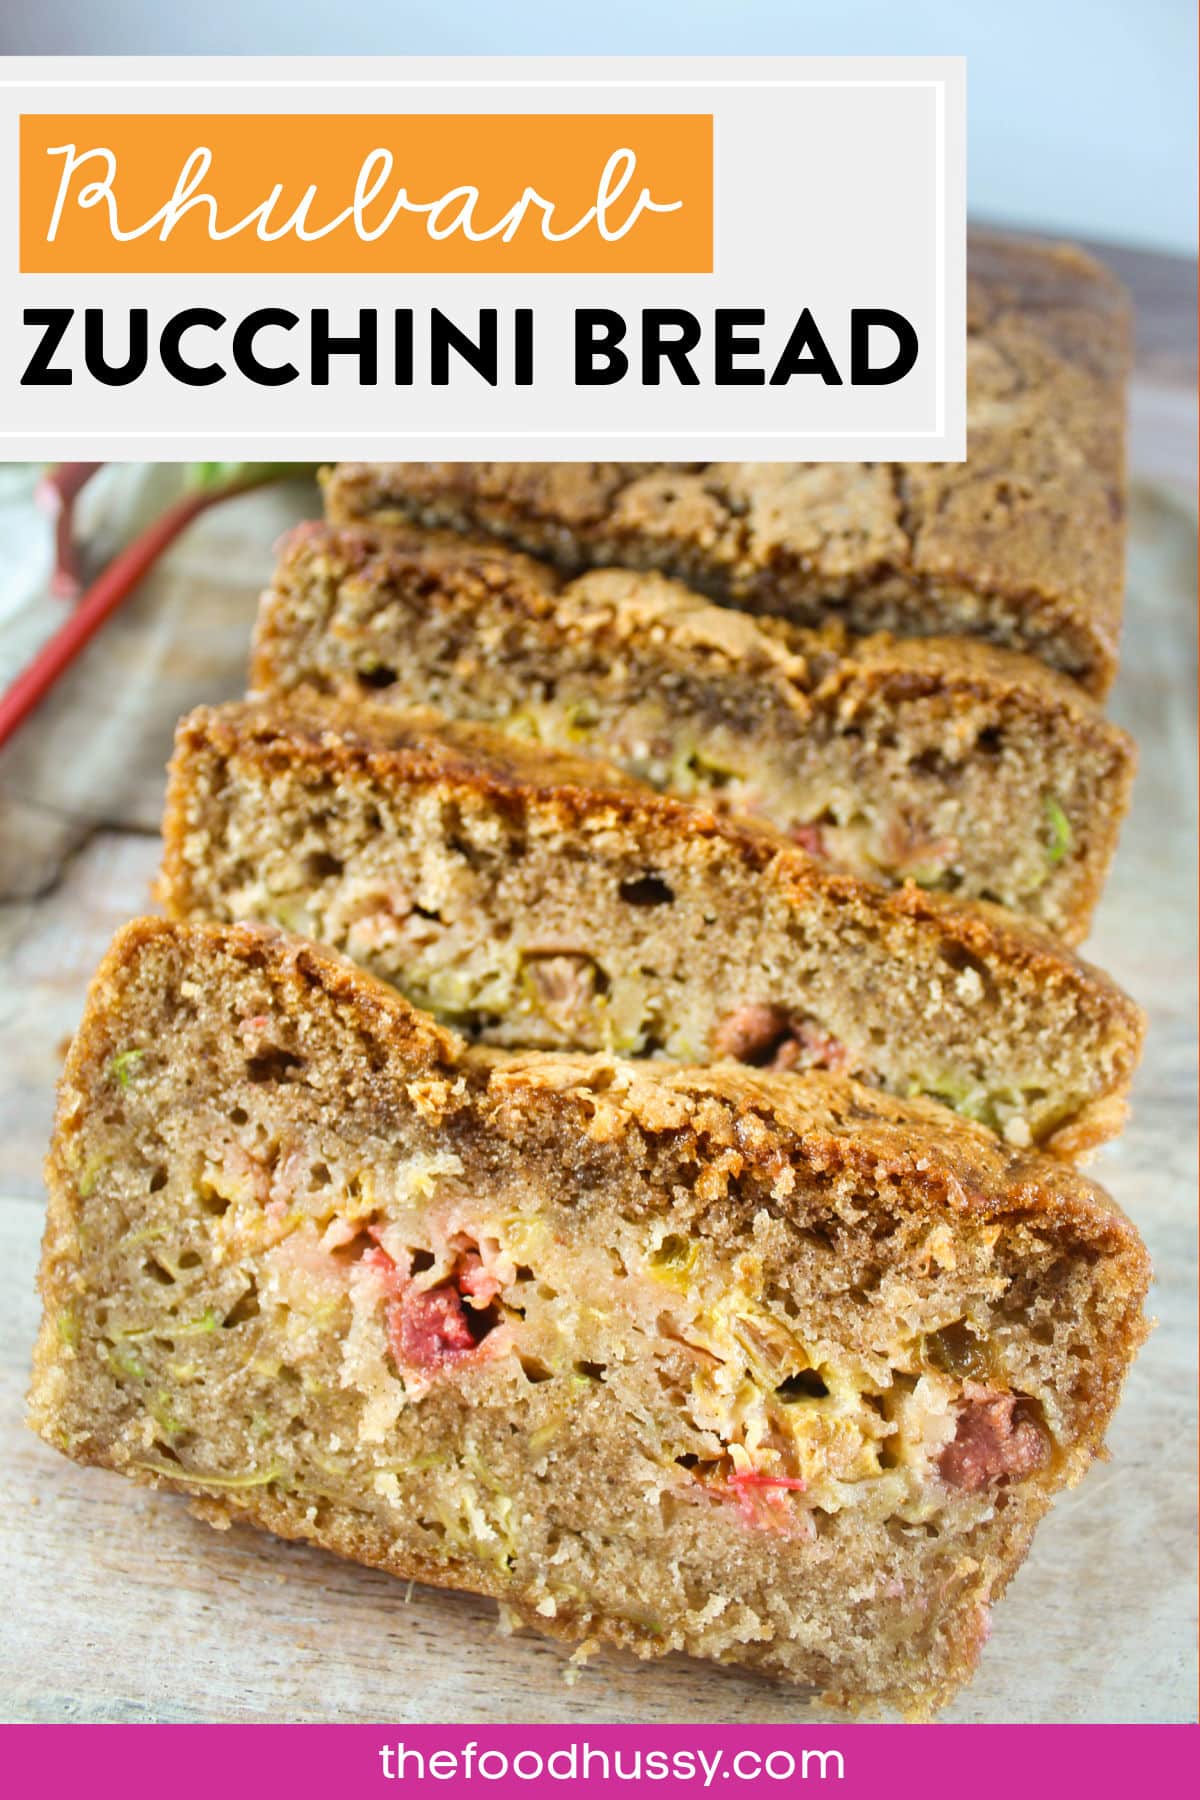 Rhubarb Zucchini Bread is a delicious sweet & tart quick bread that takes less than 10 minutes to get in the oven! This super moist bread has a touch of fall flavors with cinnamon and nutmeg as well.  via @foodhussy